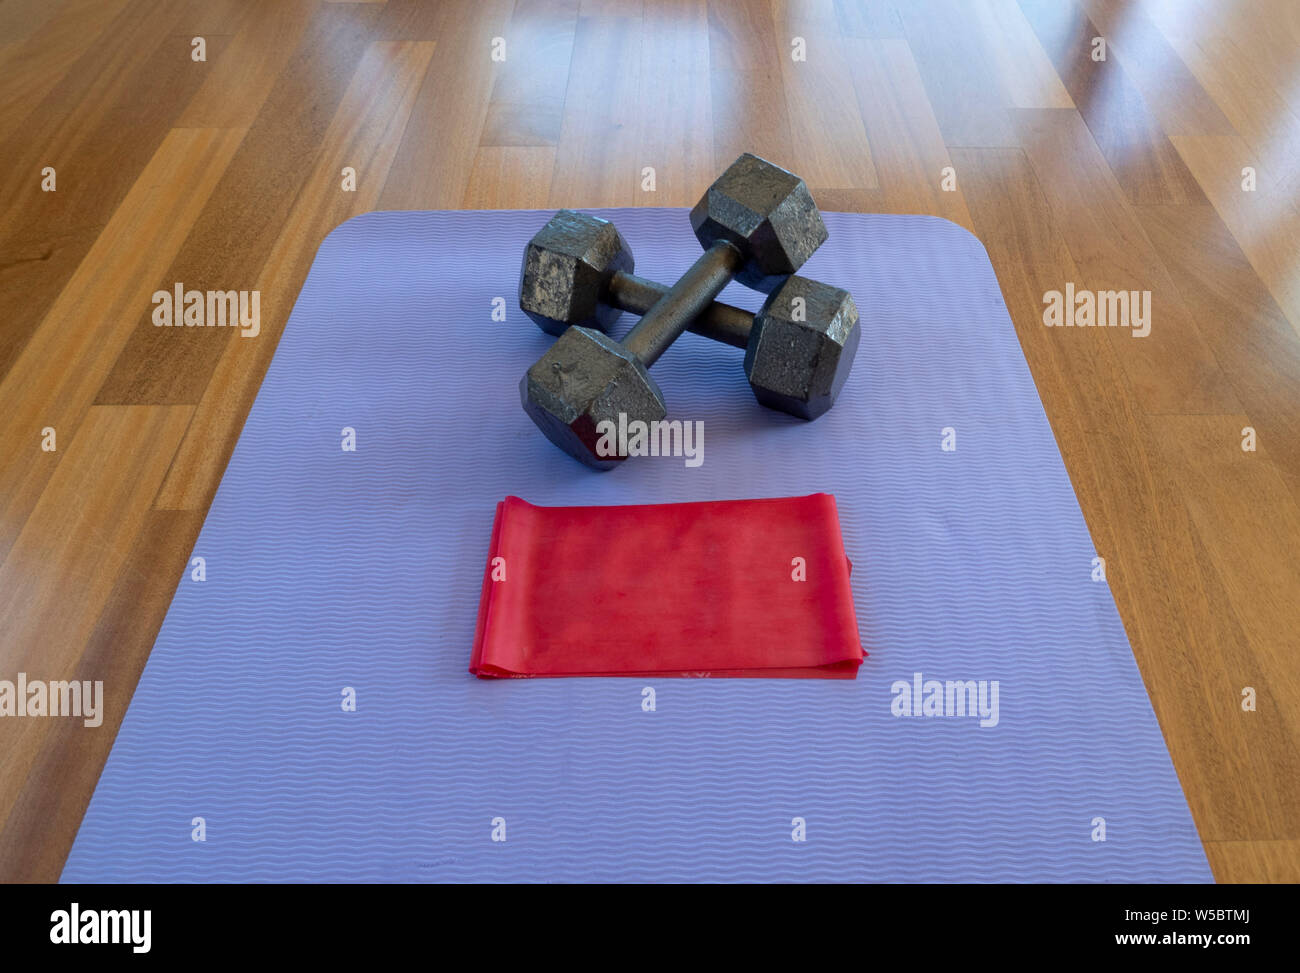 Crossed Dumbbells and Exercise band on a Yoga Mat for a Home workout Stock Photo